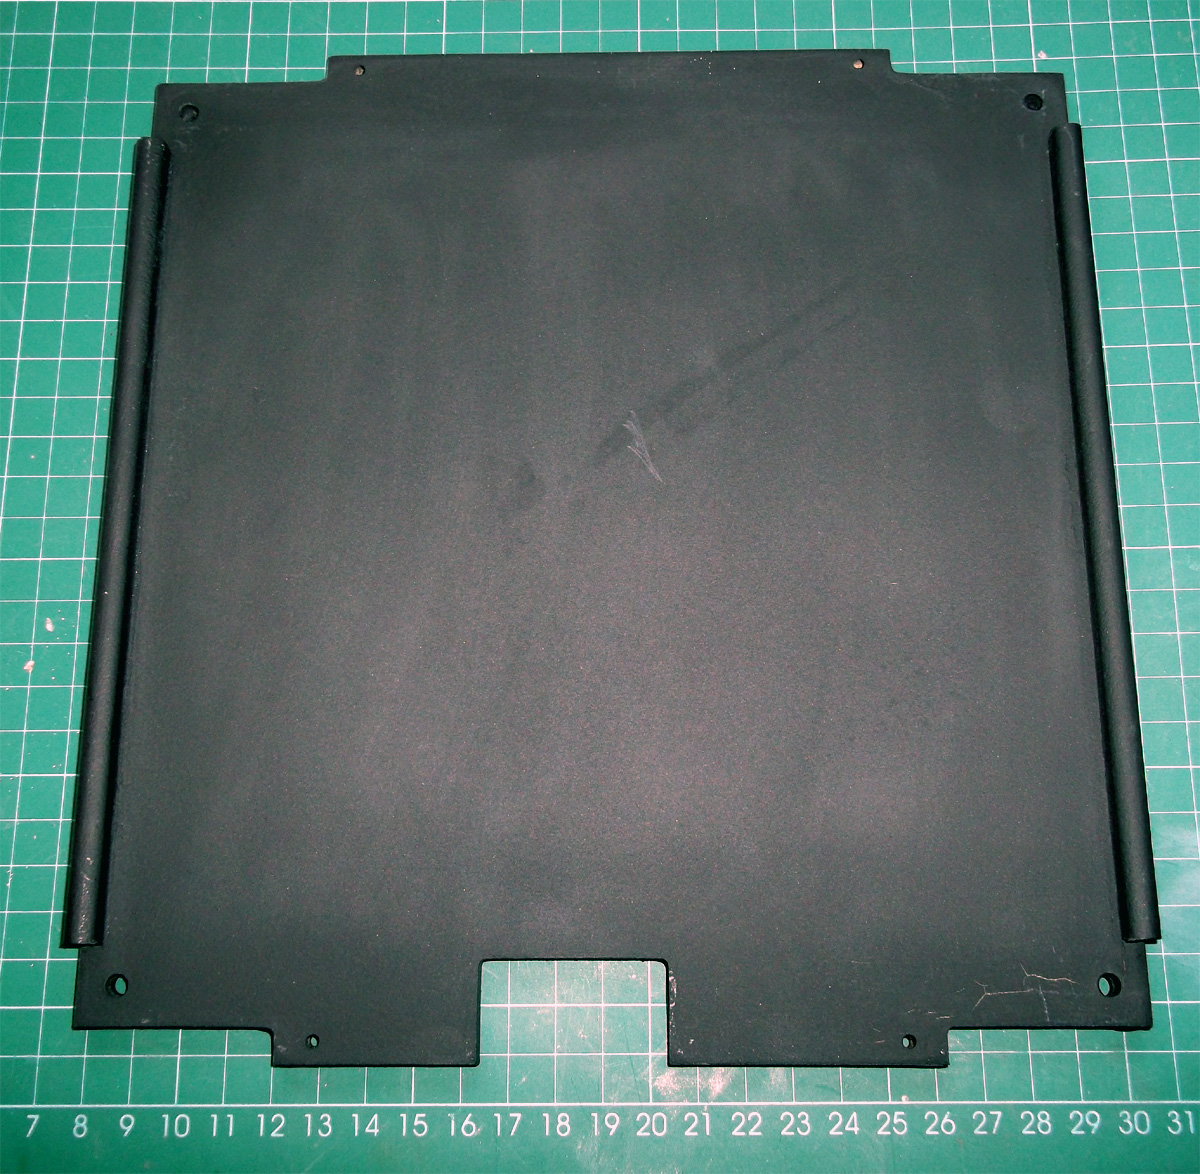 Heating bed insolation rubber mat 200x200mm buy